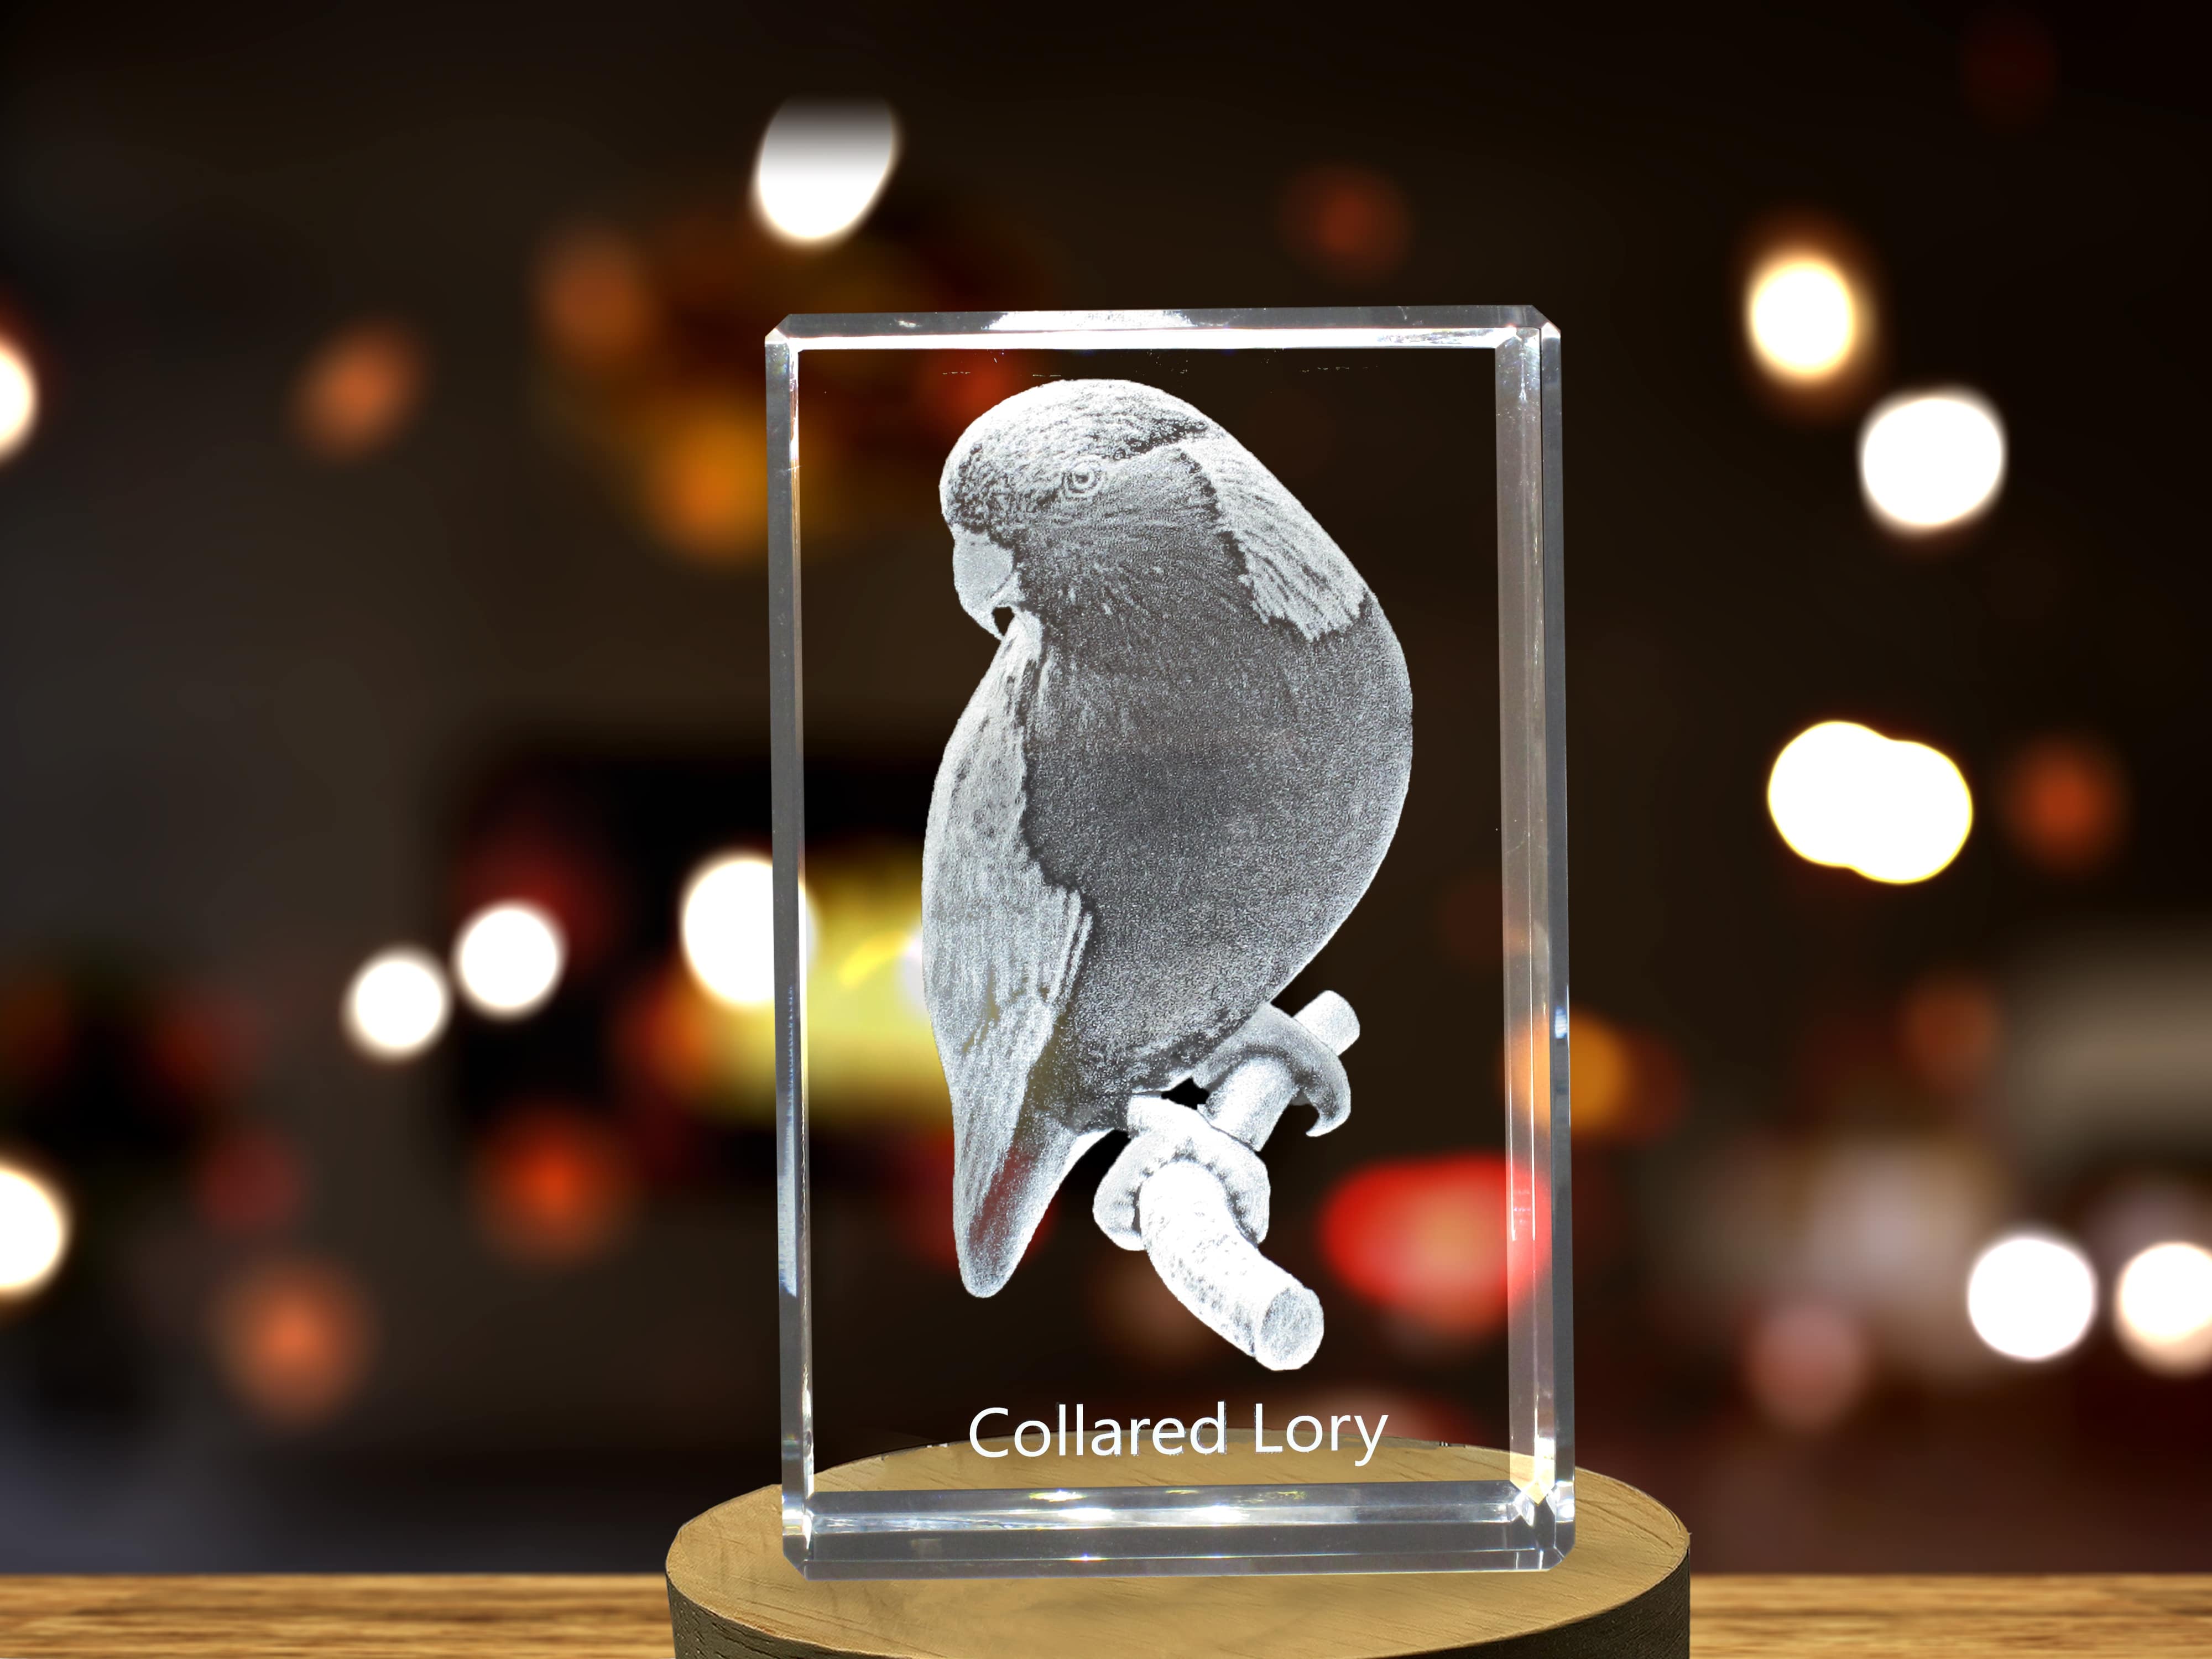 Collared Lory 3D Engraved Crystal | 3D Engraved Crystal Keepsake A&B Crystal Collection